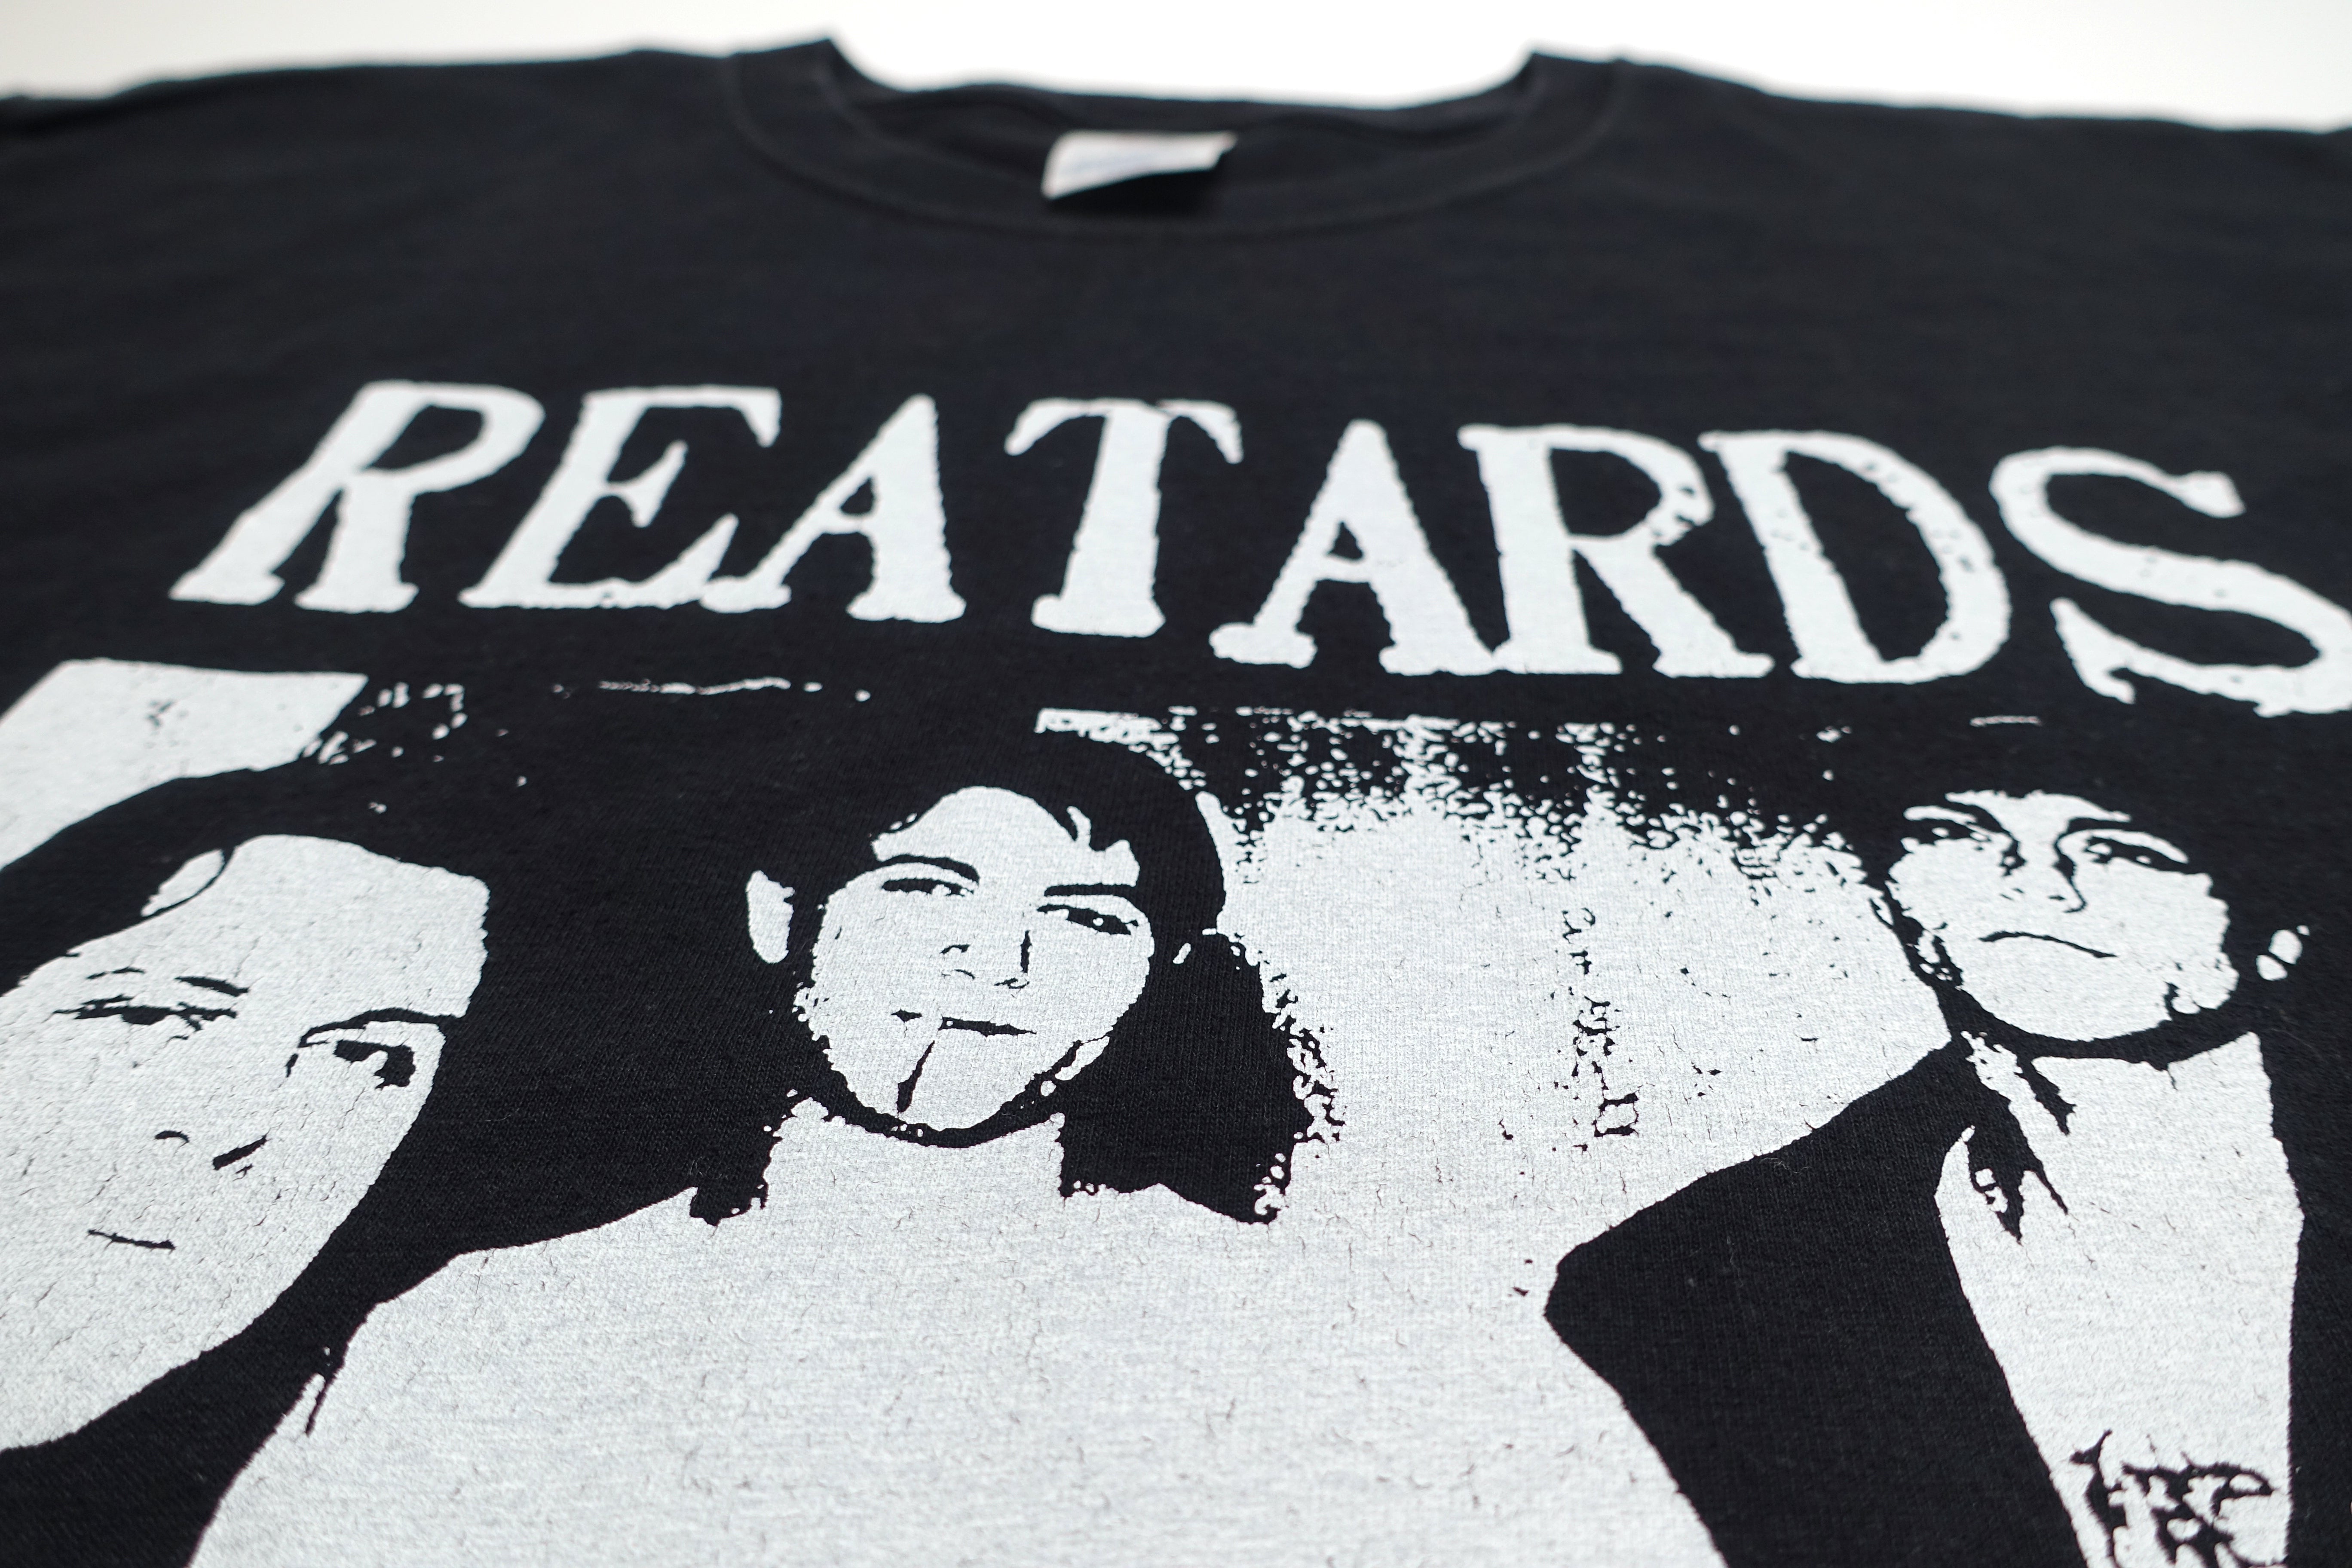 the Reatards - Teenage Hate 1998 Tour Shirt Size Large